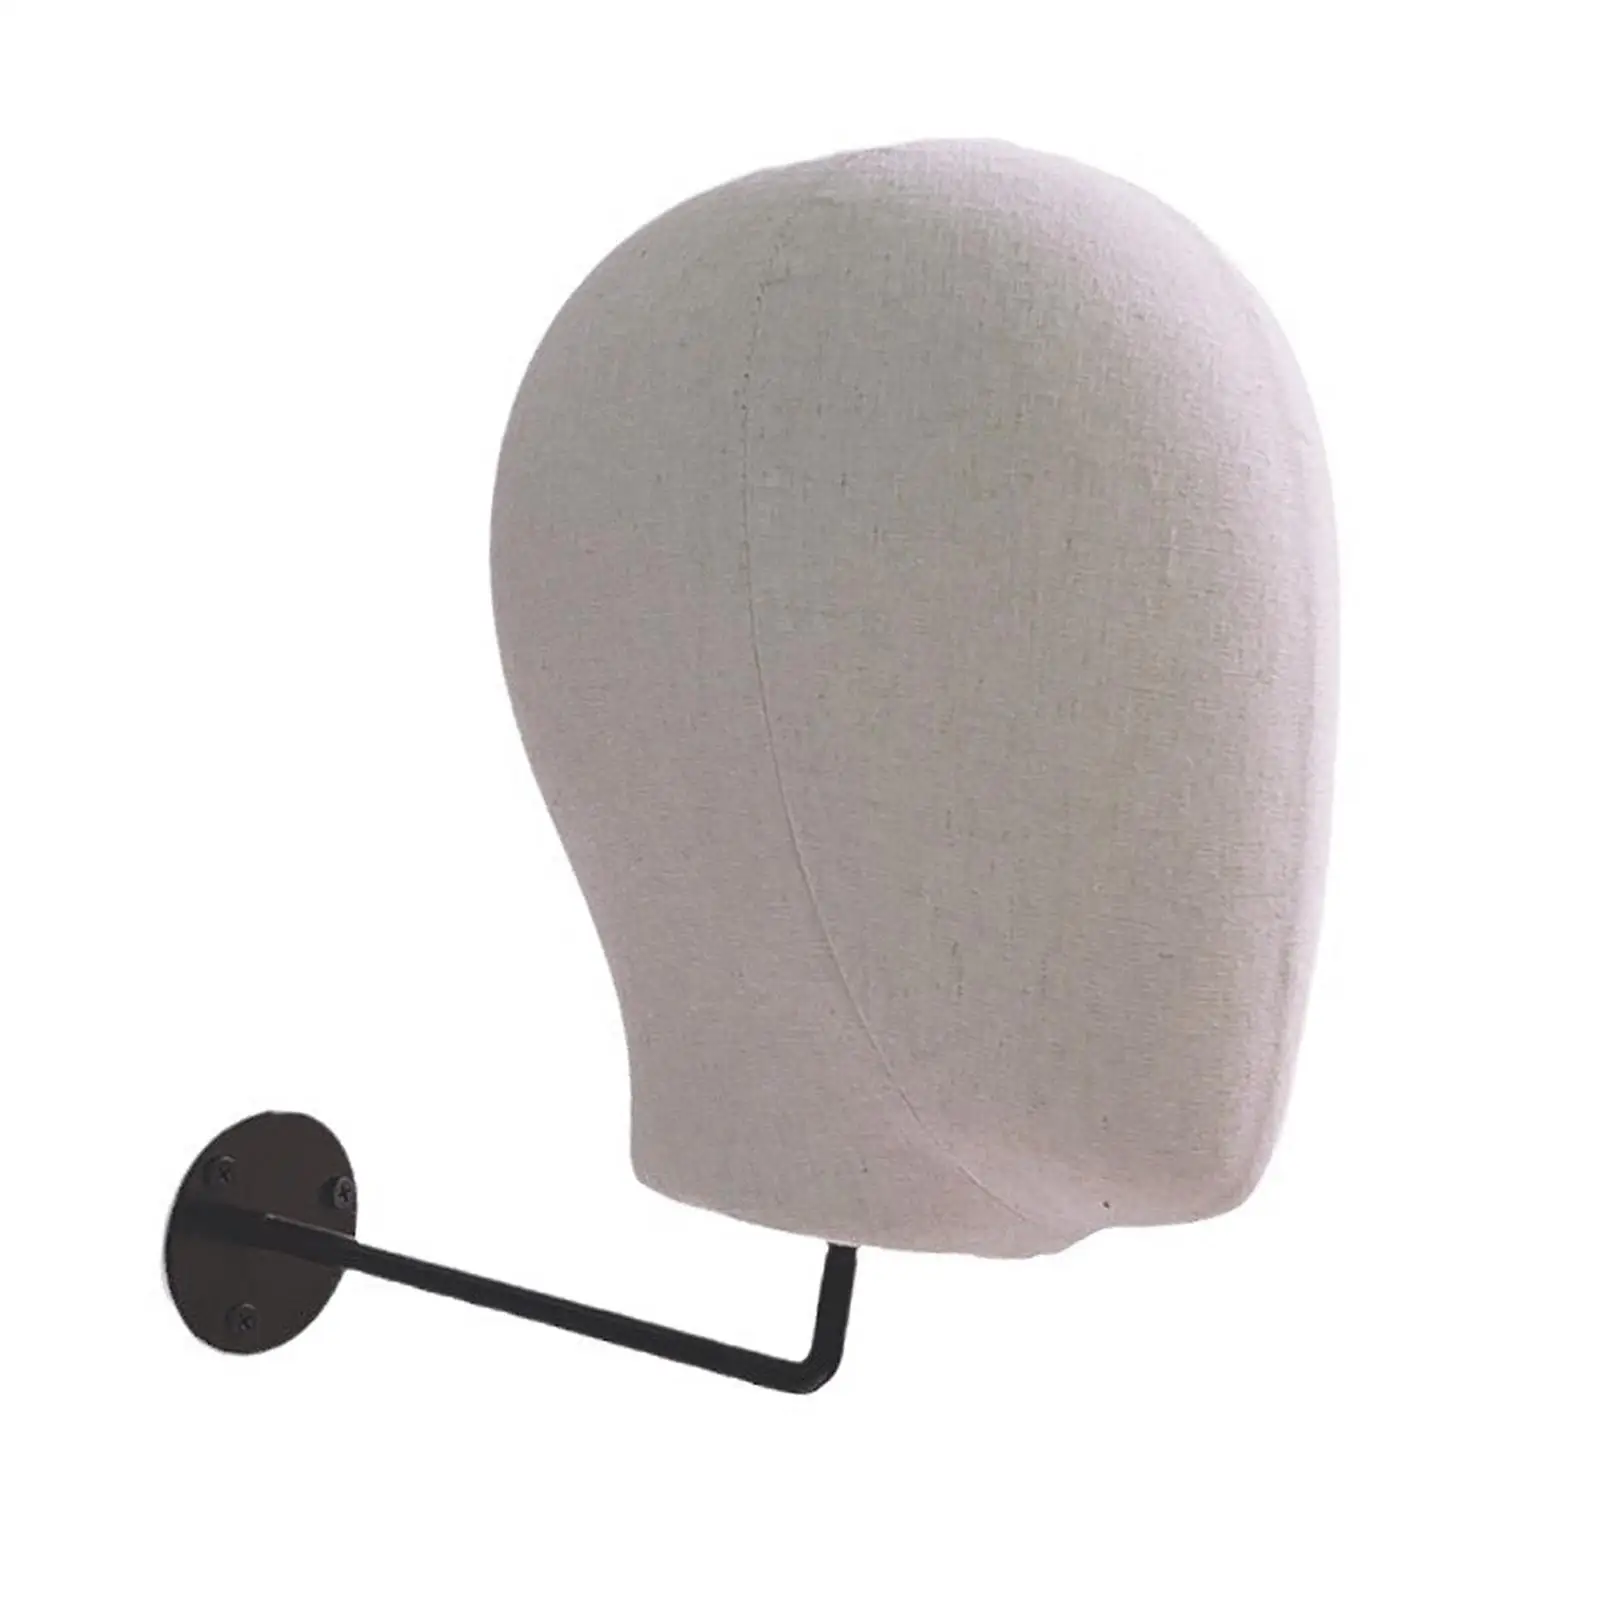 wig-head-holdermannequin-head-stand-wall-mount-for-hats-cap-salon-display-rack-for-hairdresser-shopping-mall-prop-wig-making